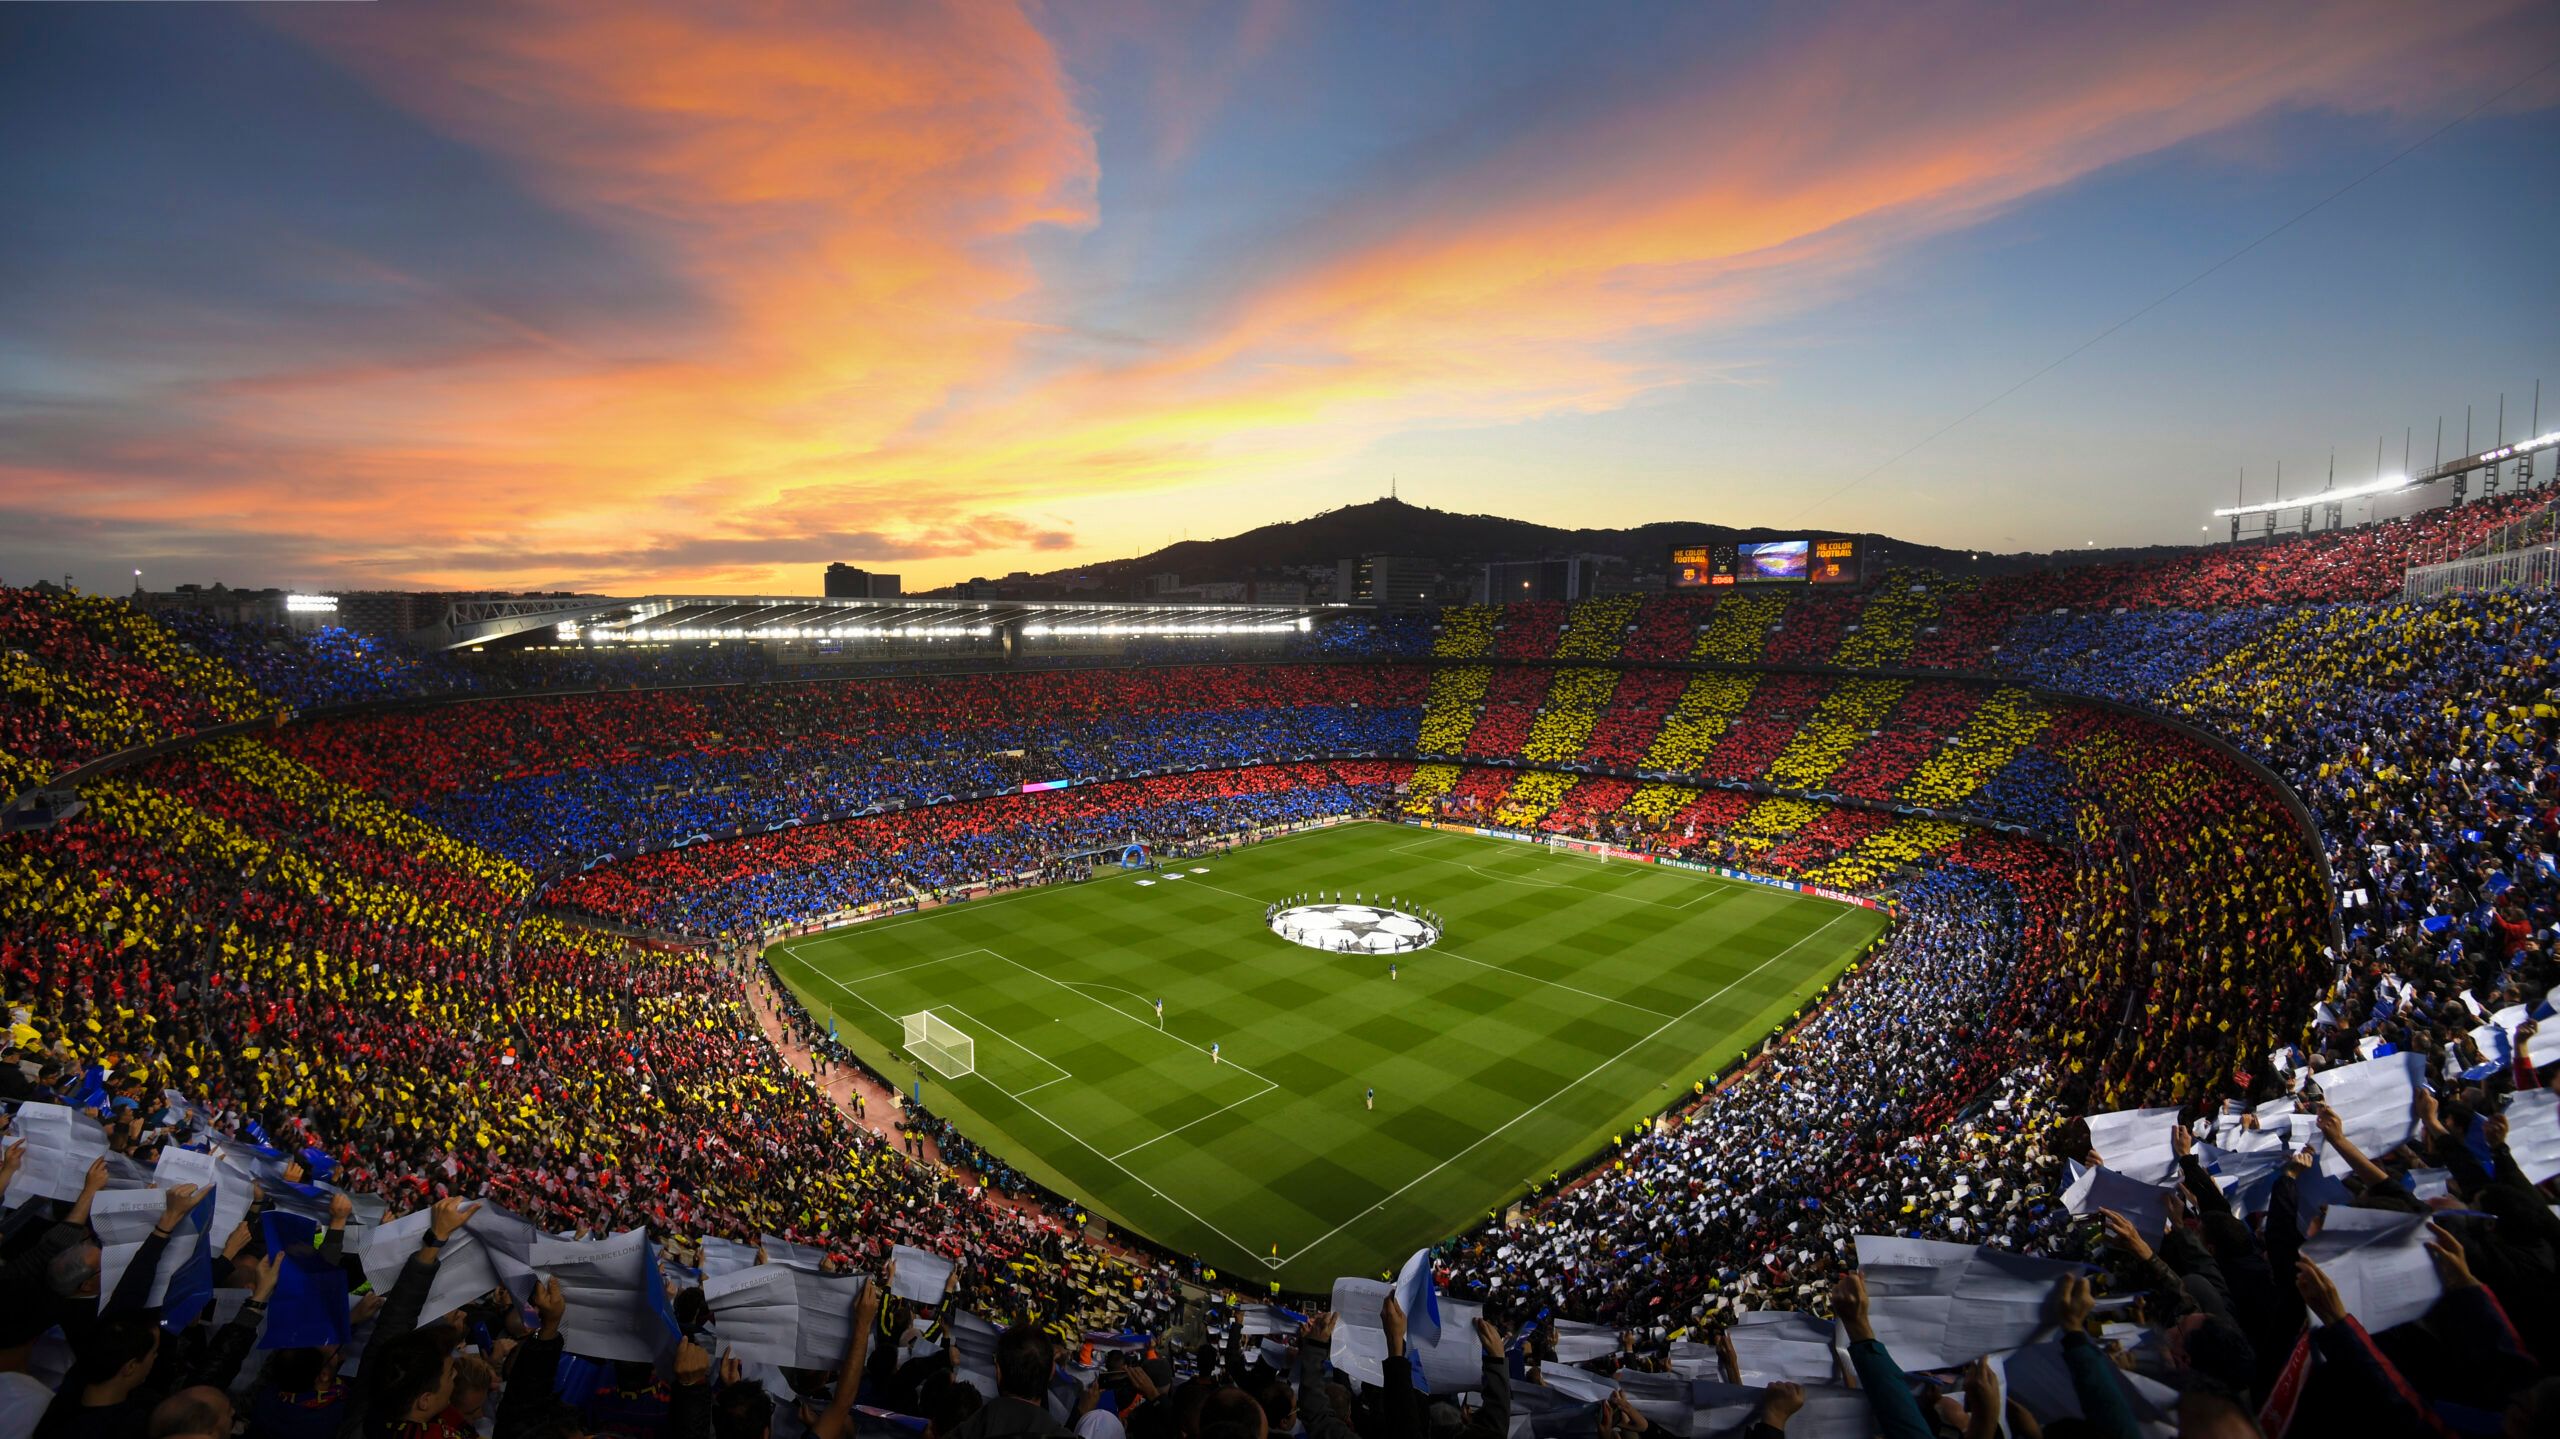 A general view of the tifo display before the UEFA Champions League Semi Final first leg match between Barcelona and Liverpool